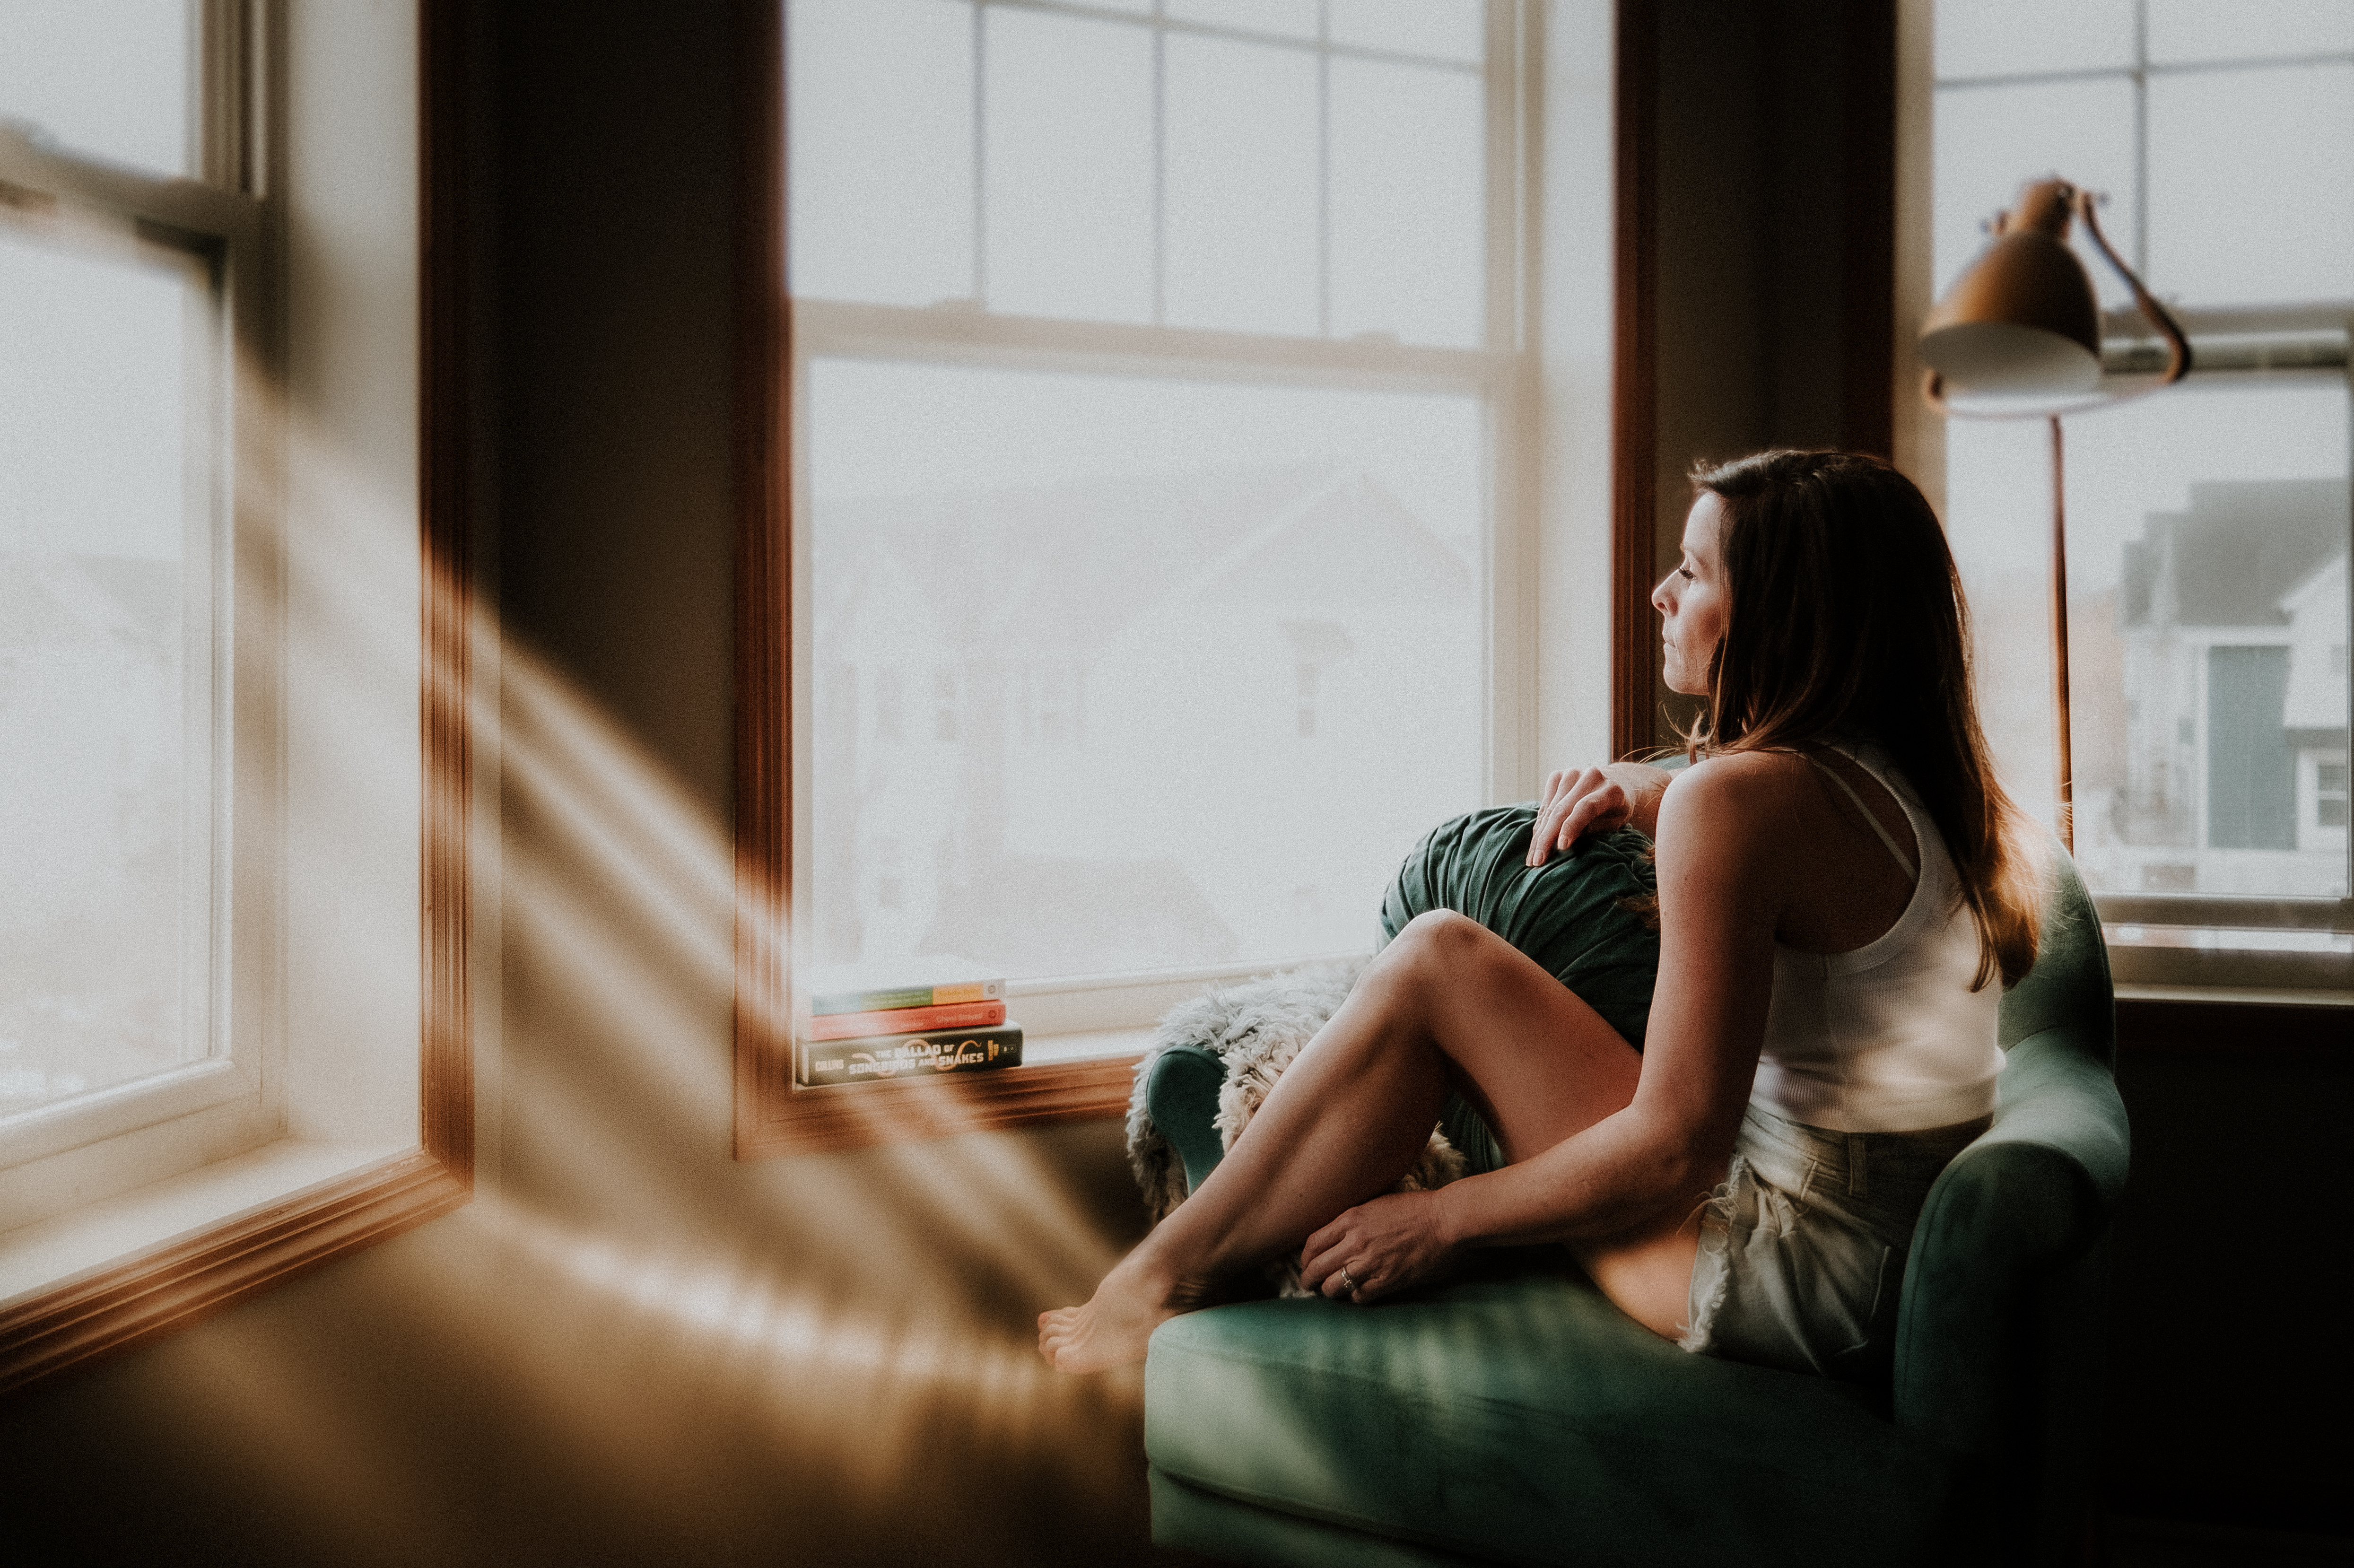 Self-portrait of a woman sitting in a chair looking out the window with an introspective expression, bathed in gorgeous light streaming in through the windows.